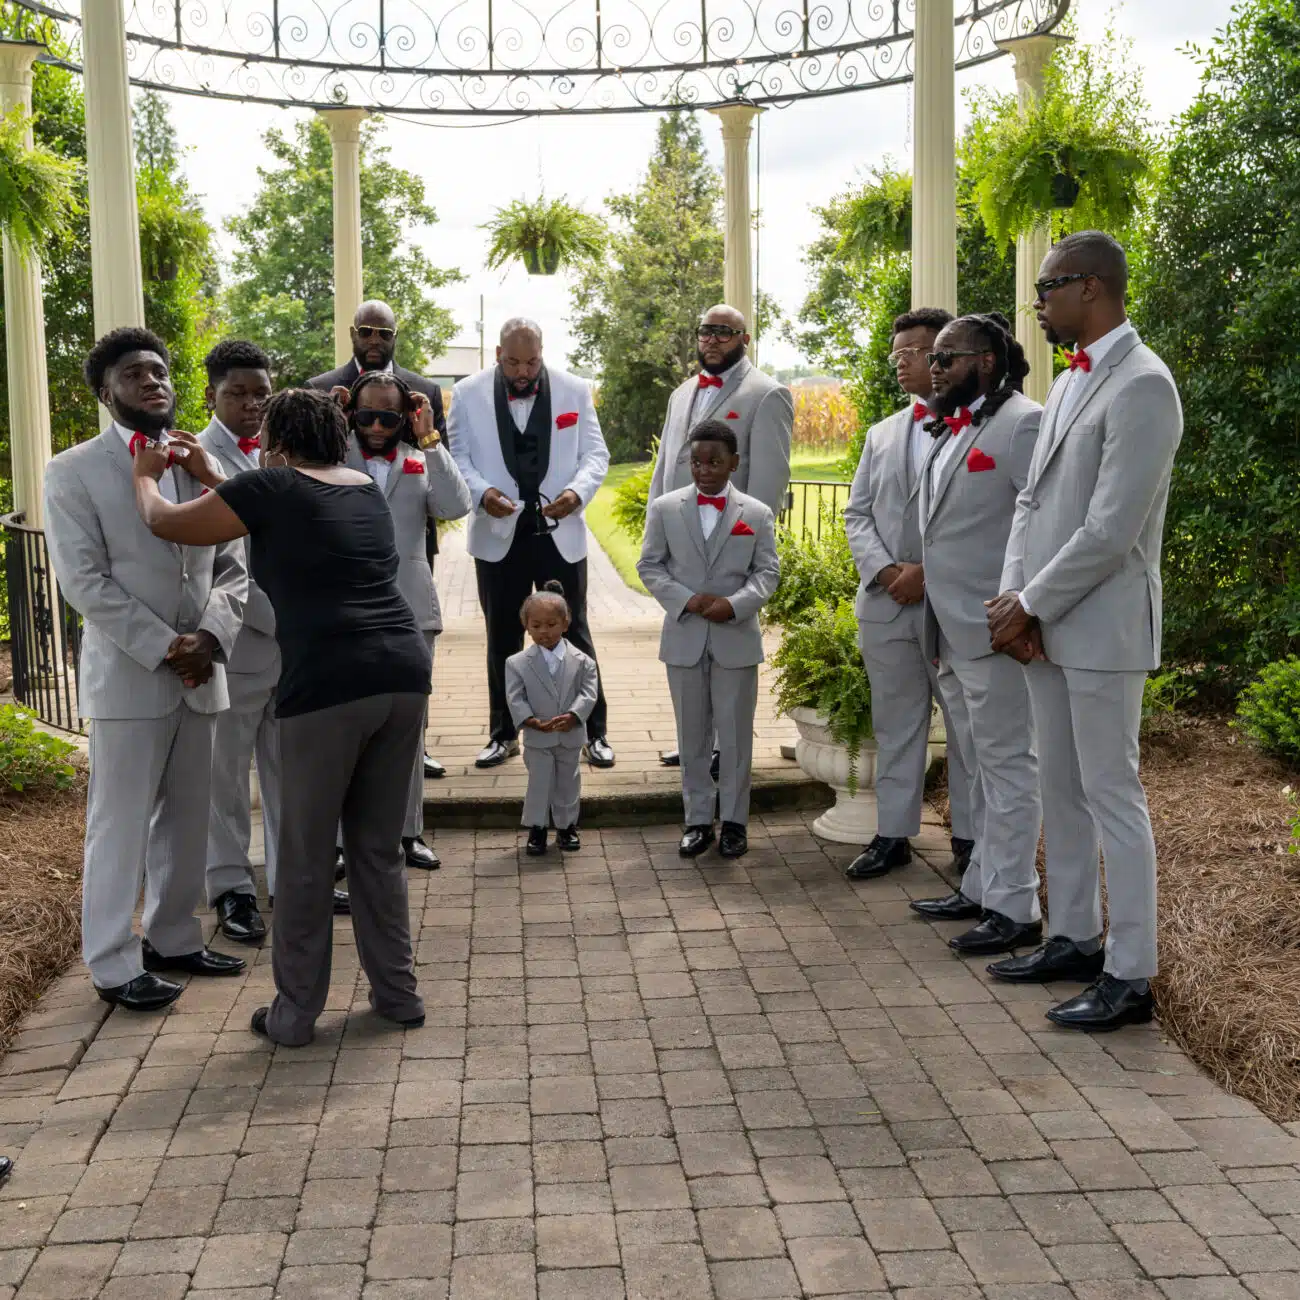 Toyette Anthony positing the groomsmen according to the wedding planning process that was set prior to the wedding day itself.